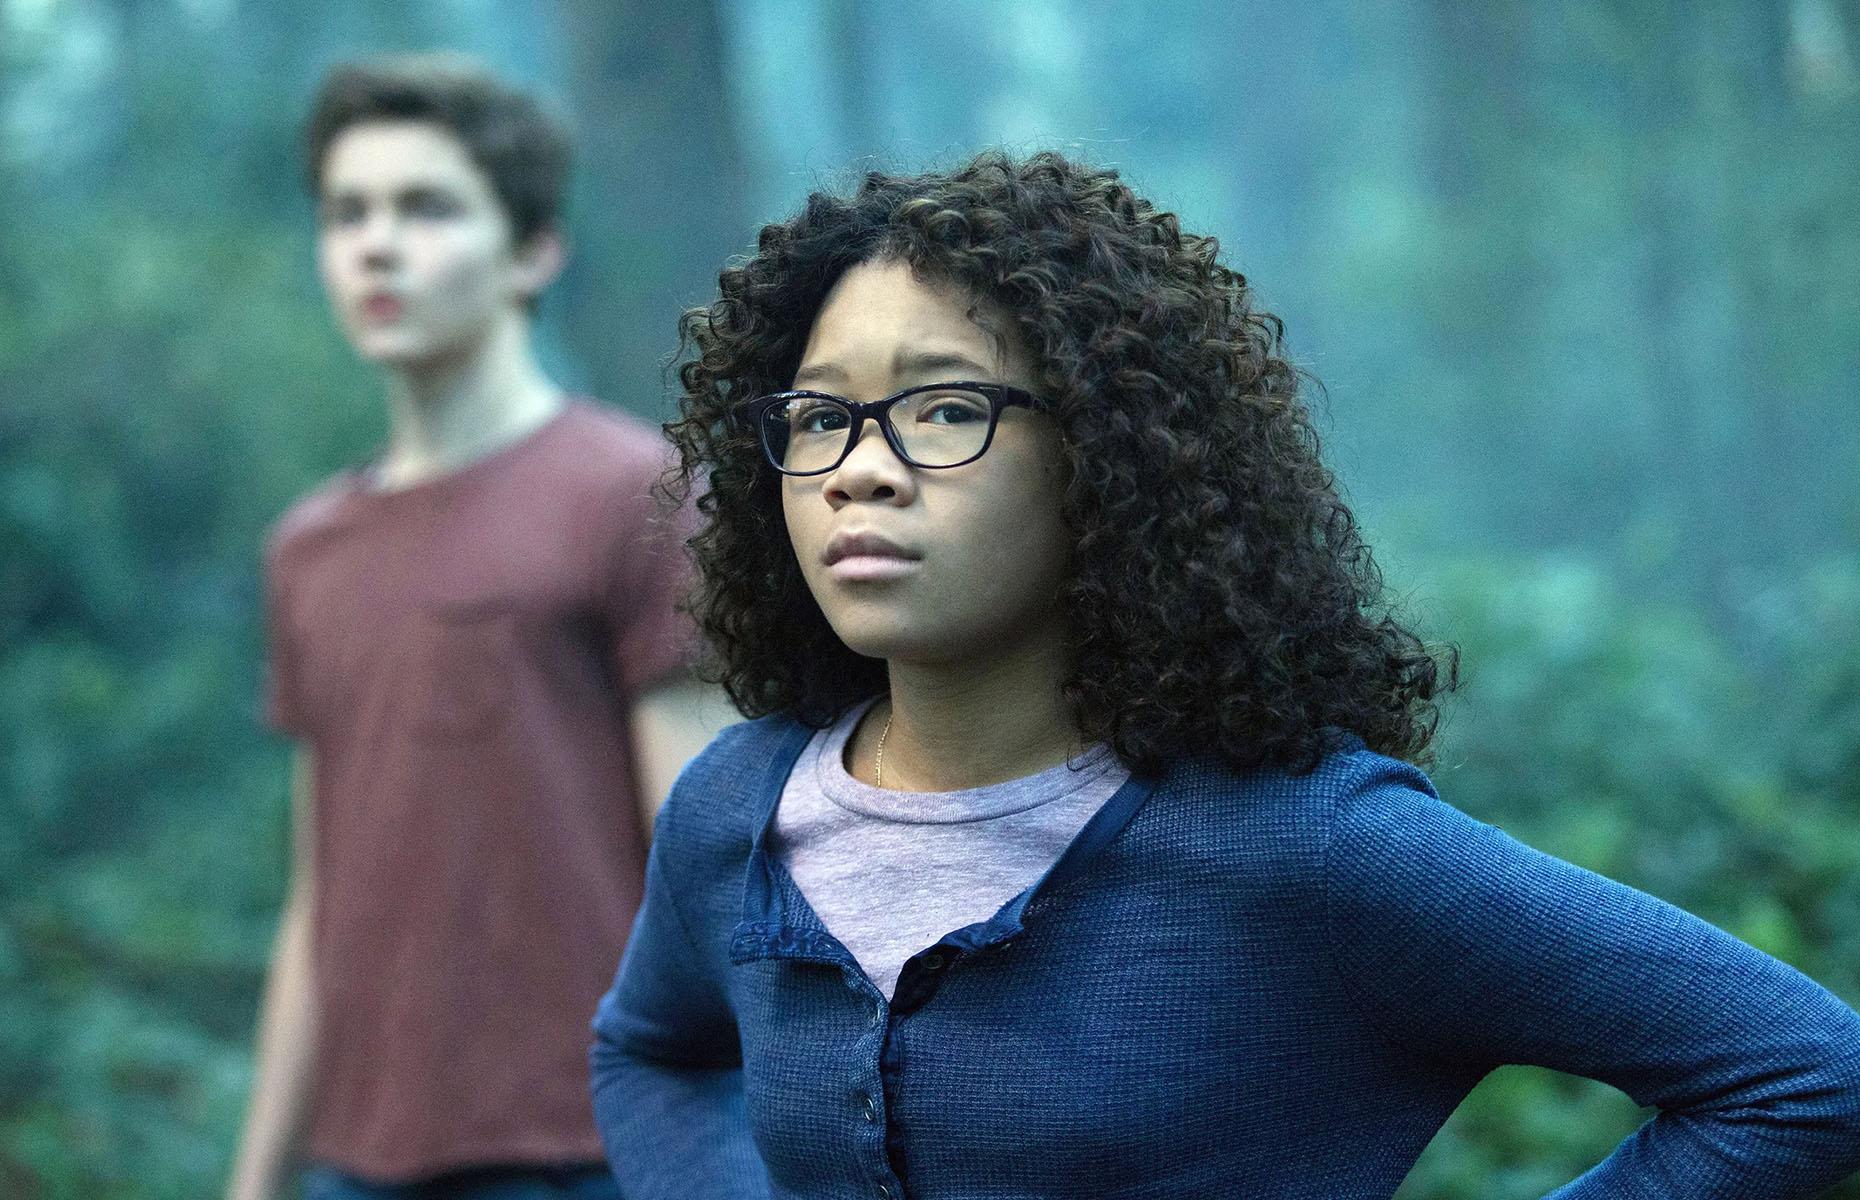 <p>Disney’s <em>A Wrinkle in Time</em> had all the makings of a hit blockbuster, including a $130 million production budget and a star-studded cast featuring Reese Witherspoon, Oprah Winfrey, and Chris Pine.</p>  <p>Surprisingly, the fantasy-adventure flick failed to attract moviegoers, earning just $132 million globally upon its 2018 release. Tough box office competition from another Disney release, the superhero movie <em>Black Panther</em>, is thought to have been a significant factor in its downfall. </p>  <p>Though the film technically turned a small profit against its production budget, <em>Screen Rant</em> suggests expenses such as marketing and distribution will have cost Disney around $193 million. </p>